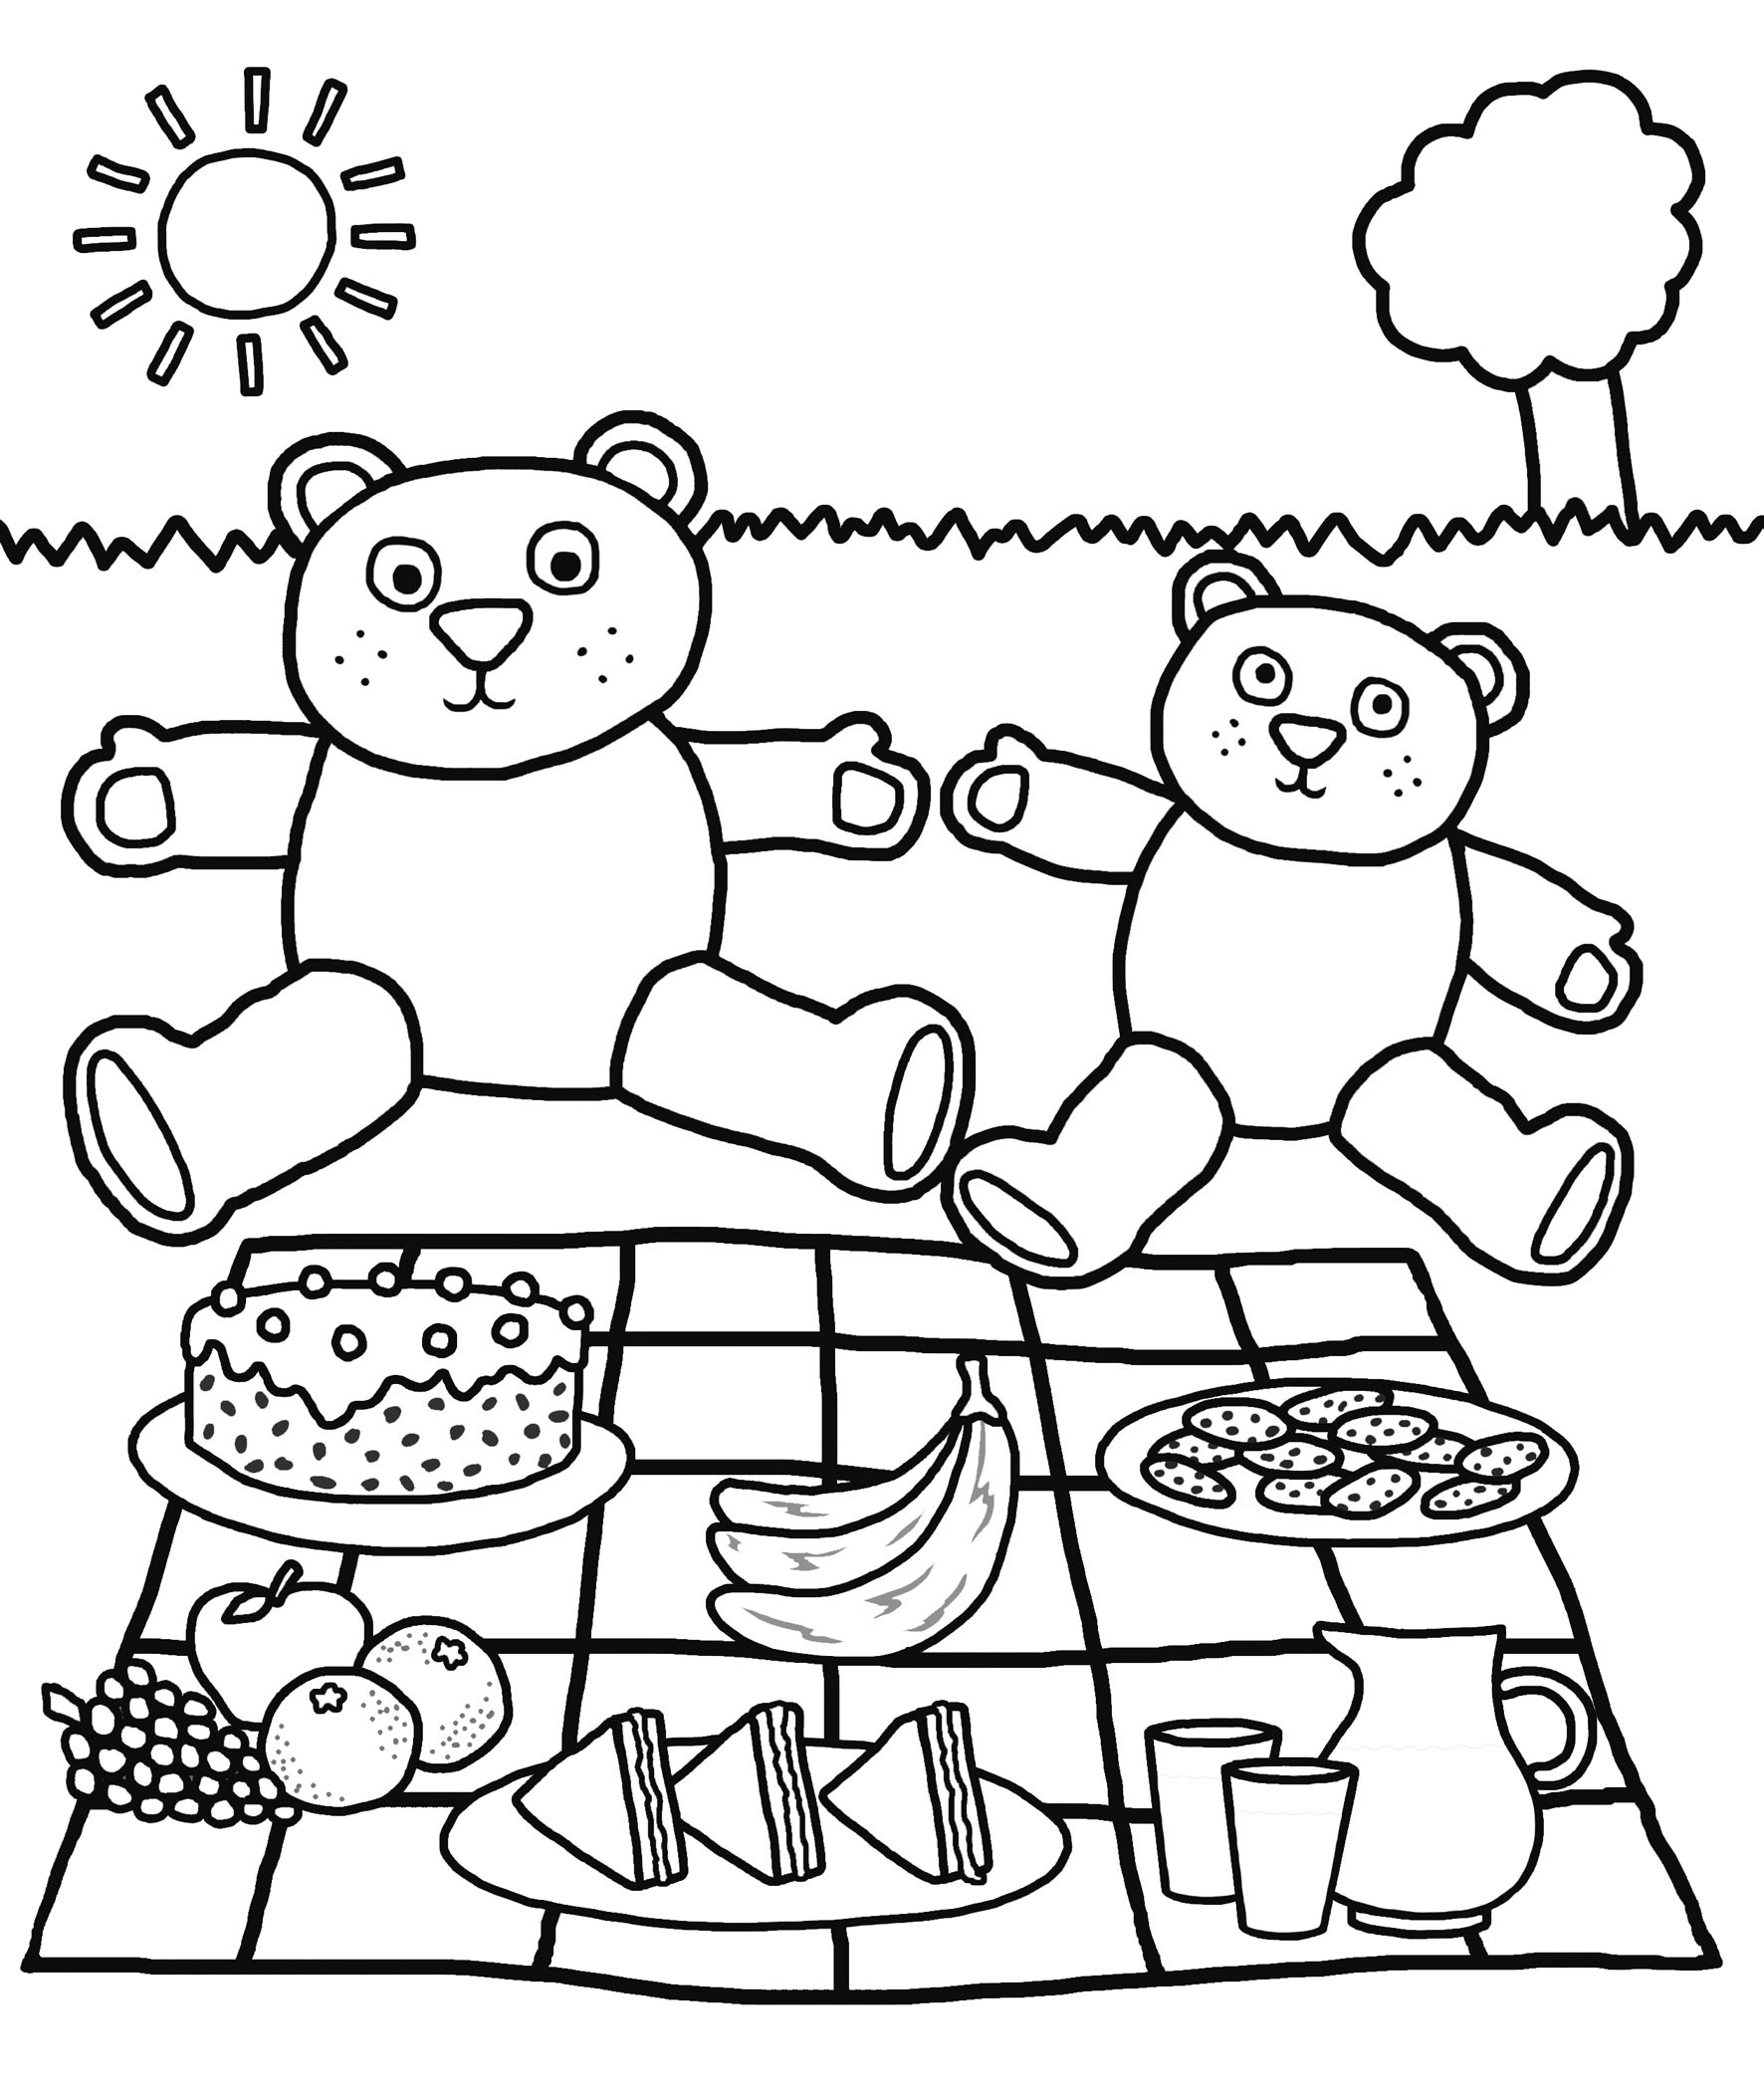 Coloring Pages For Preschool
 Free Printable Kindergarten Coloring Pages For Kids